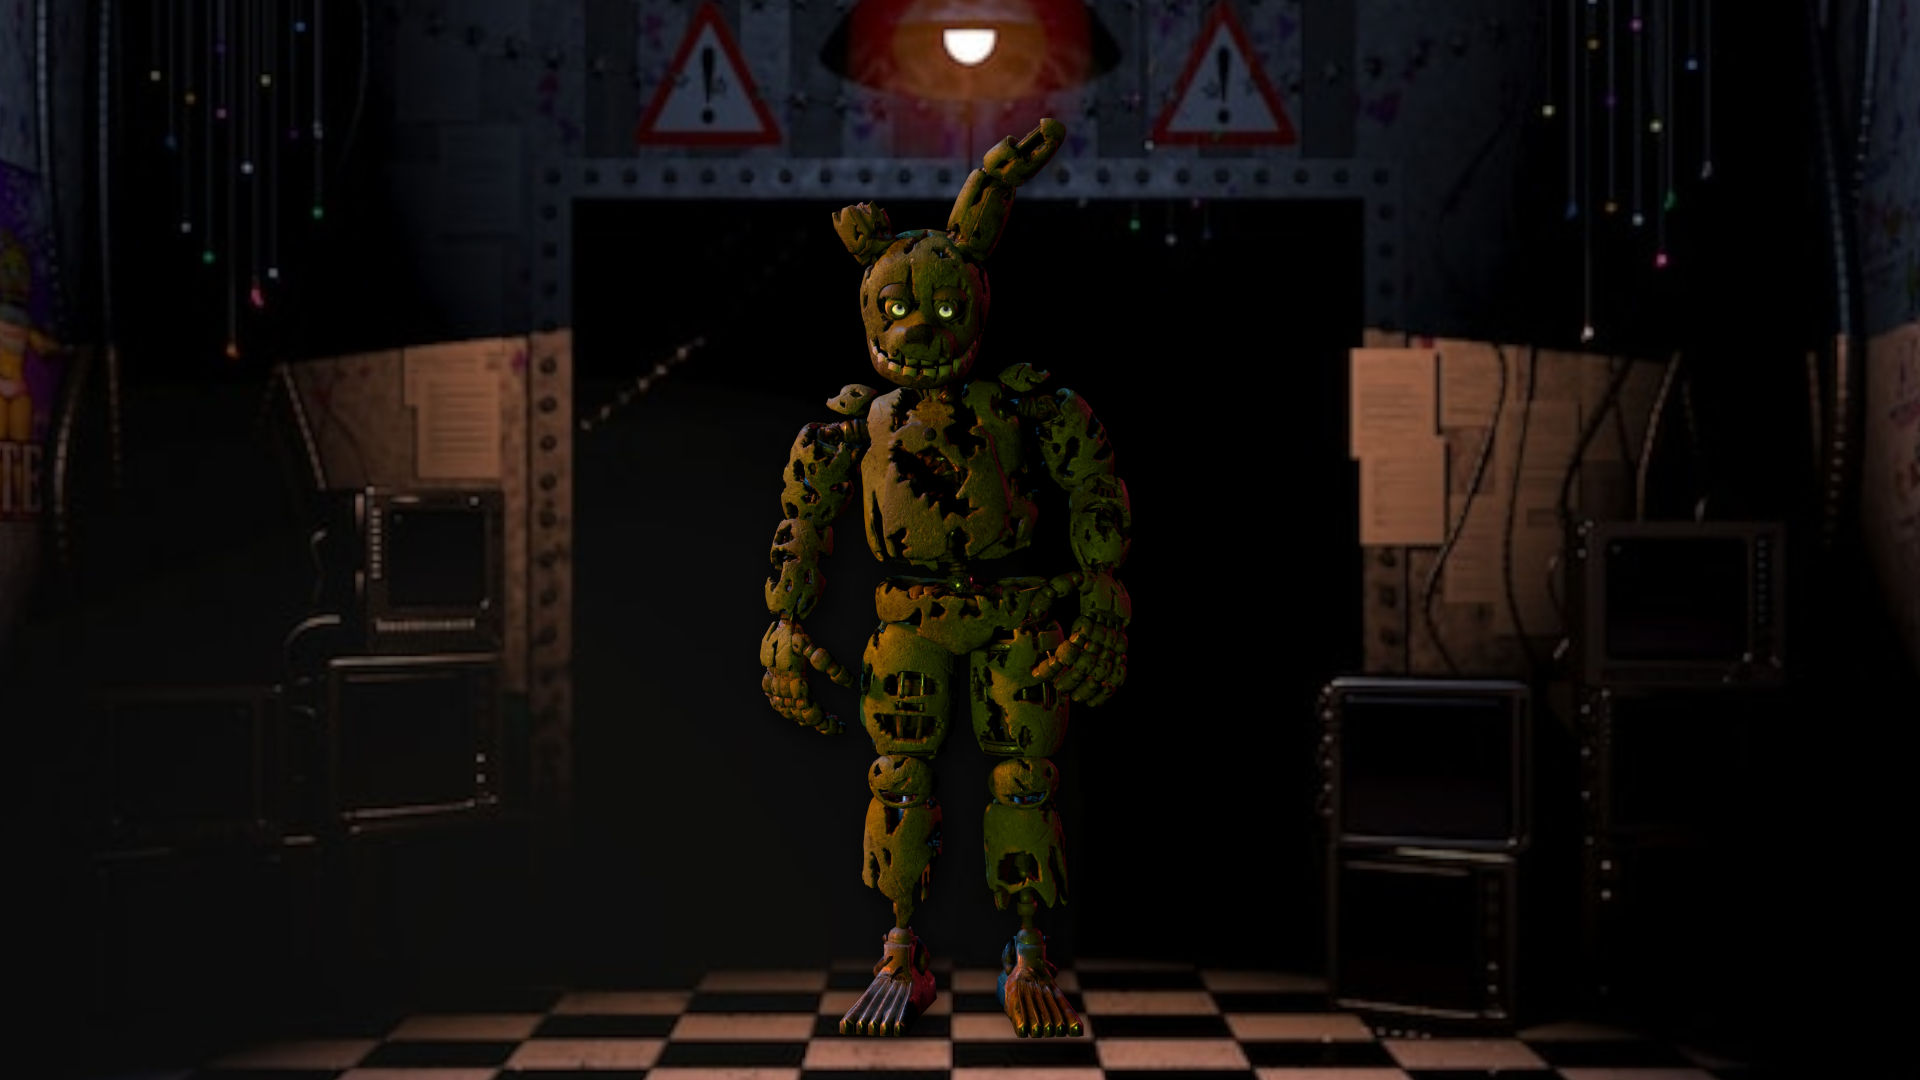 FNAF Springtrap – lore, personality, and appearances